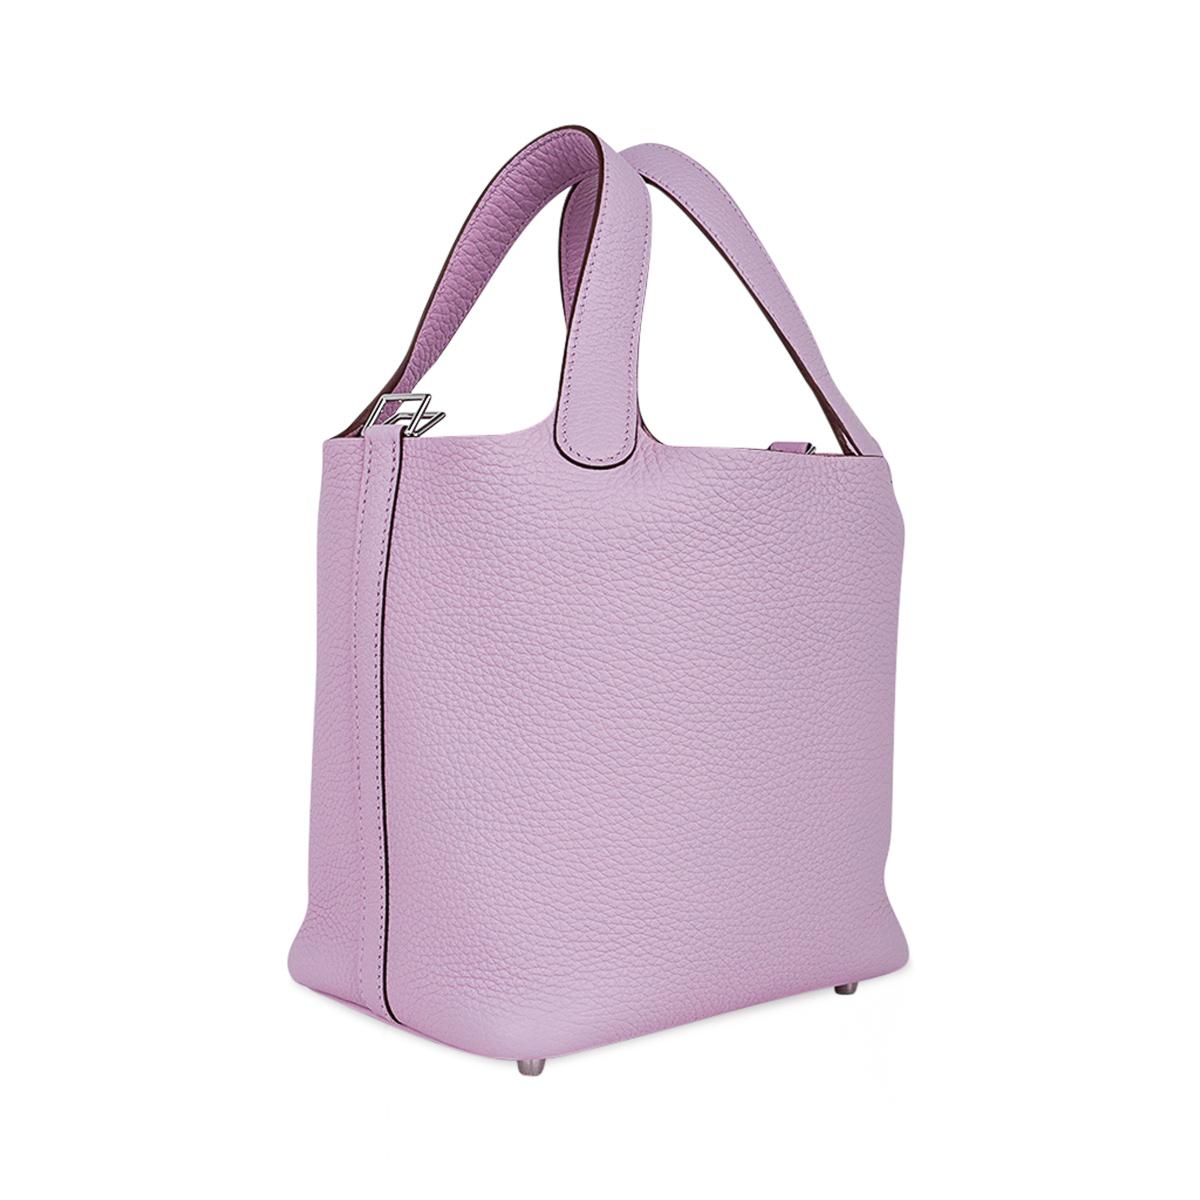 Mightychic offers an Hermes Picotin Lock 18 tote bag featured in coveted Mauve Sylvestre.
Ultimate neutral colour.
This charming Hermes Picotin tote is a perfect everyday go to bag.
Clemence leather with Palladium hardware.
Comes with lock and keys,